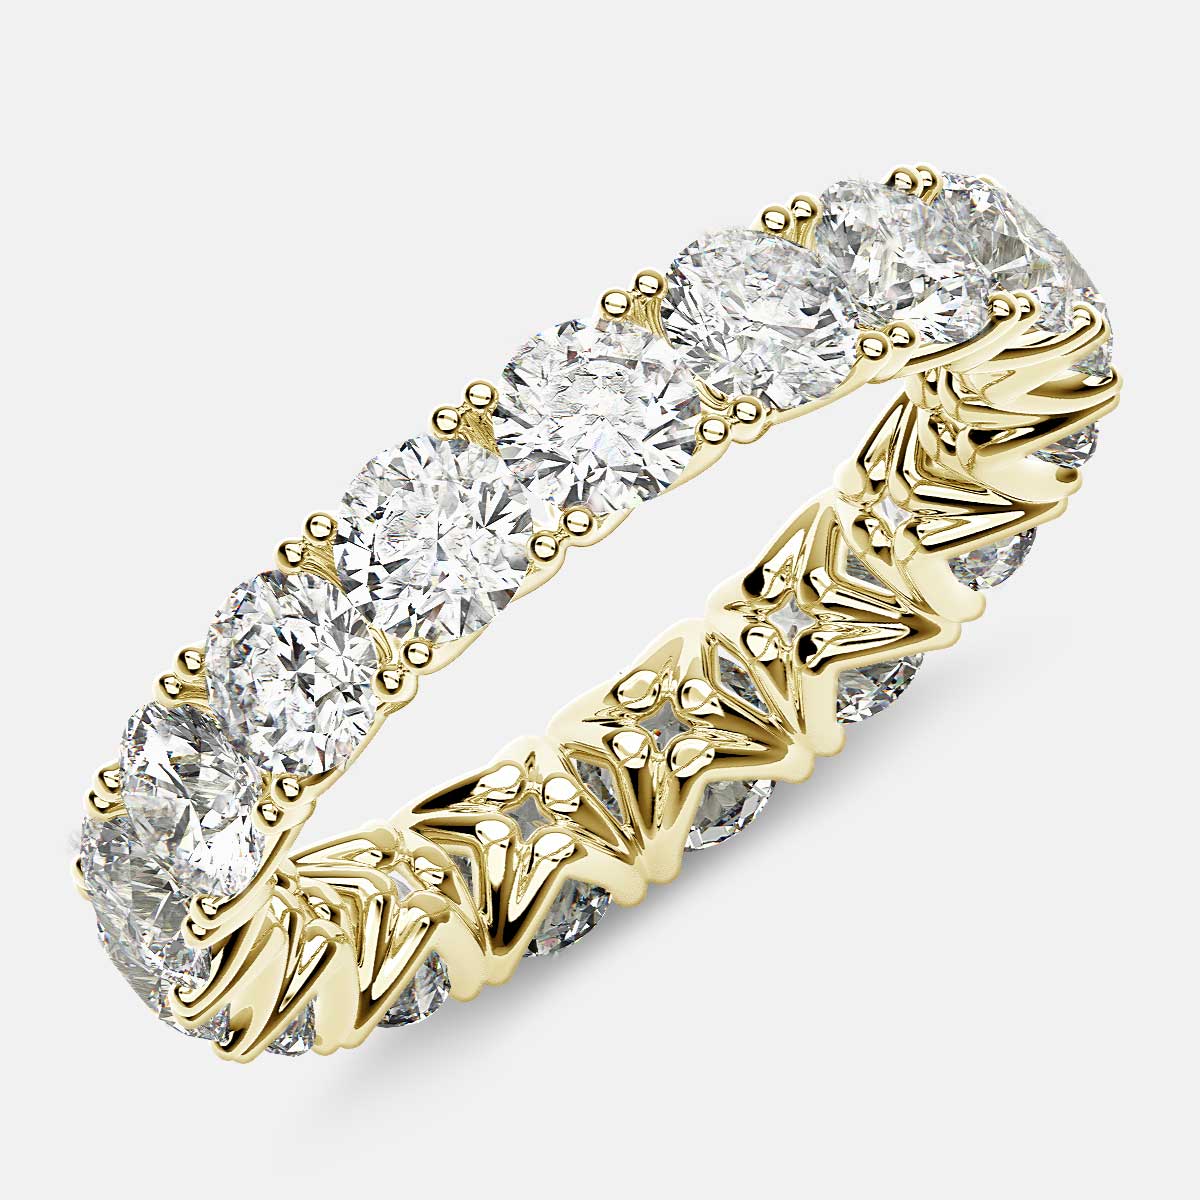 Curved V-Prong Eternity Ring with Round Diamonds in 18k Yellow Gold